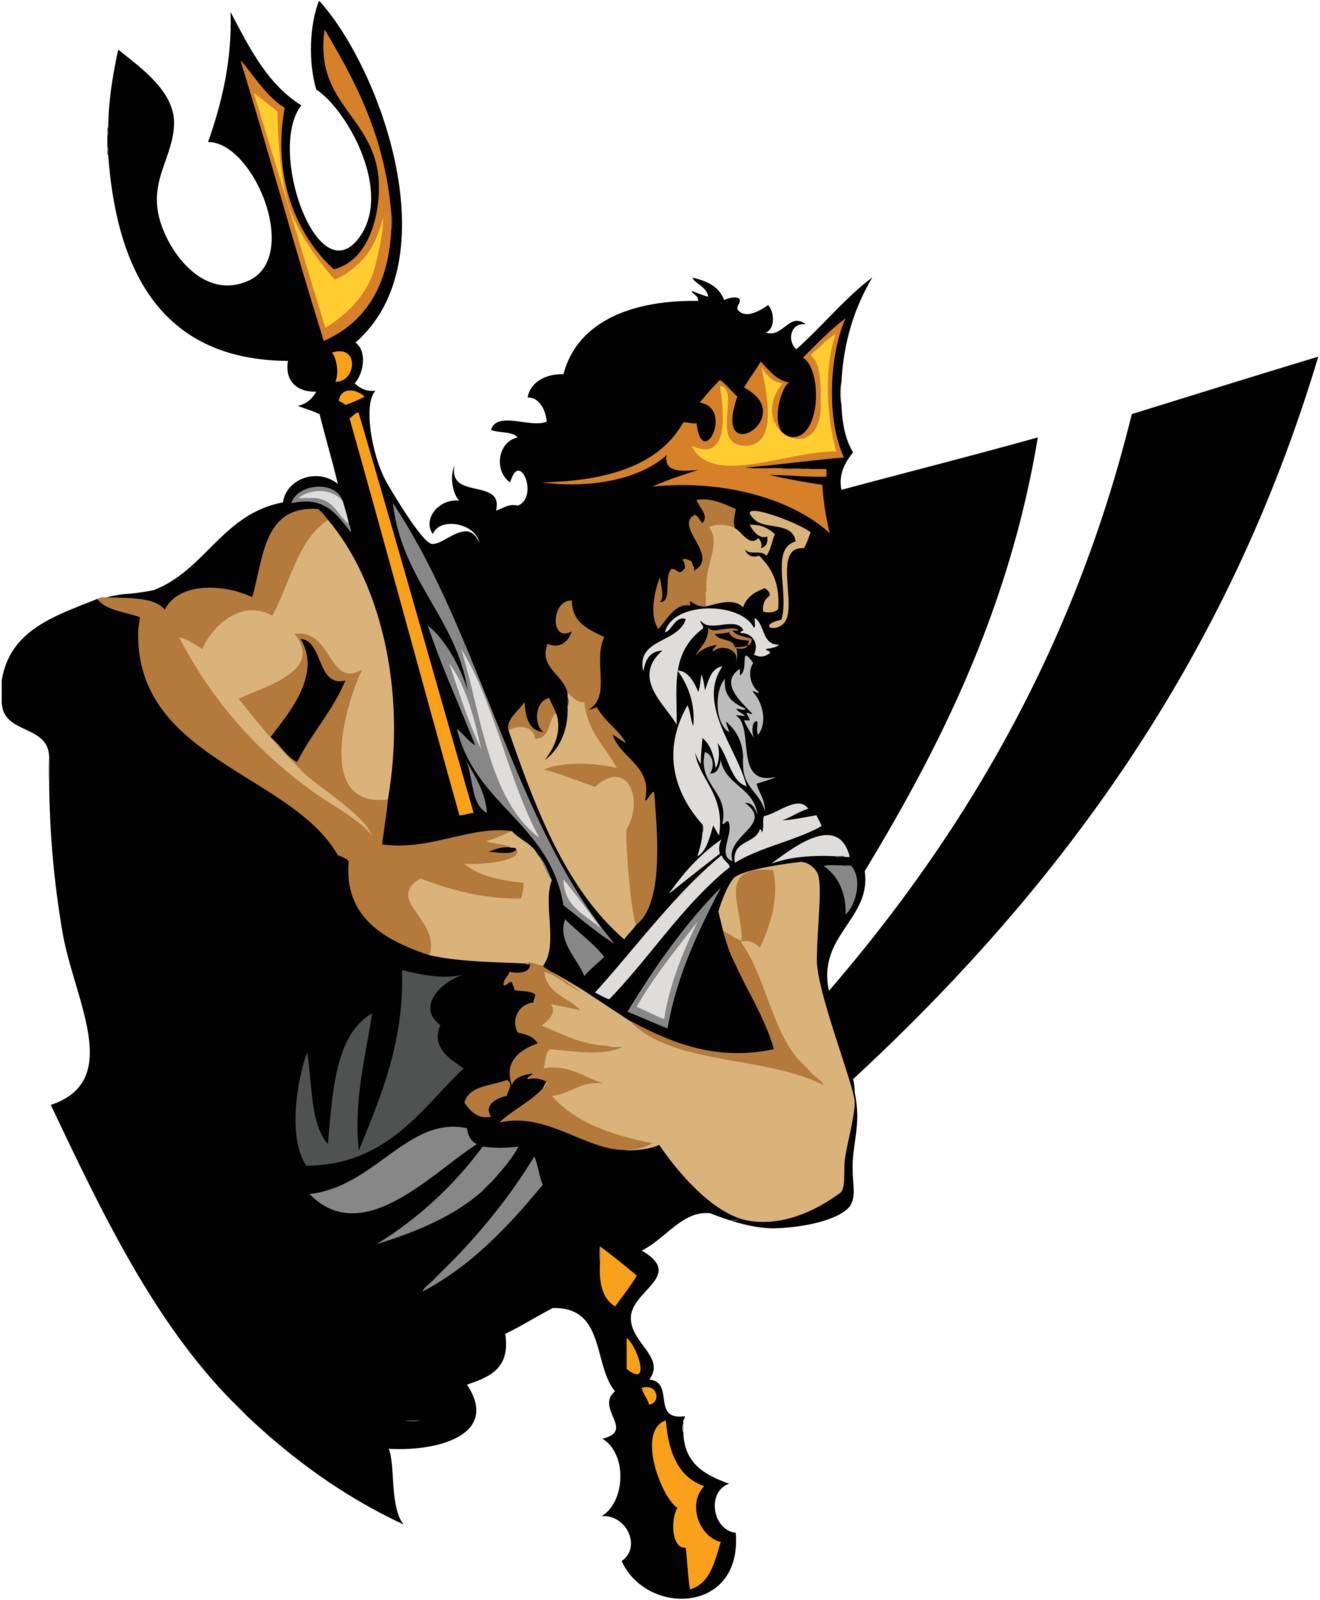 Greek God holding a trident and wearing a toga Graphic Vector Image